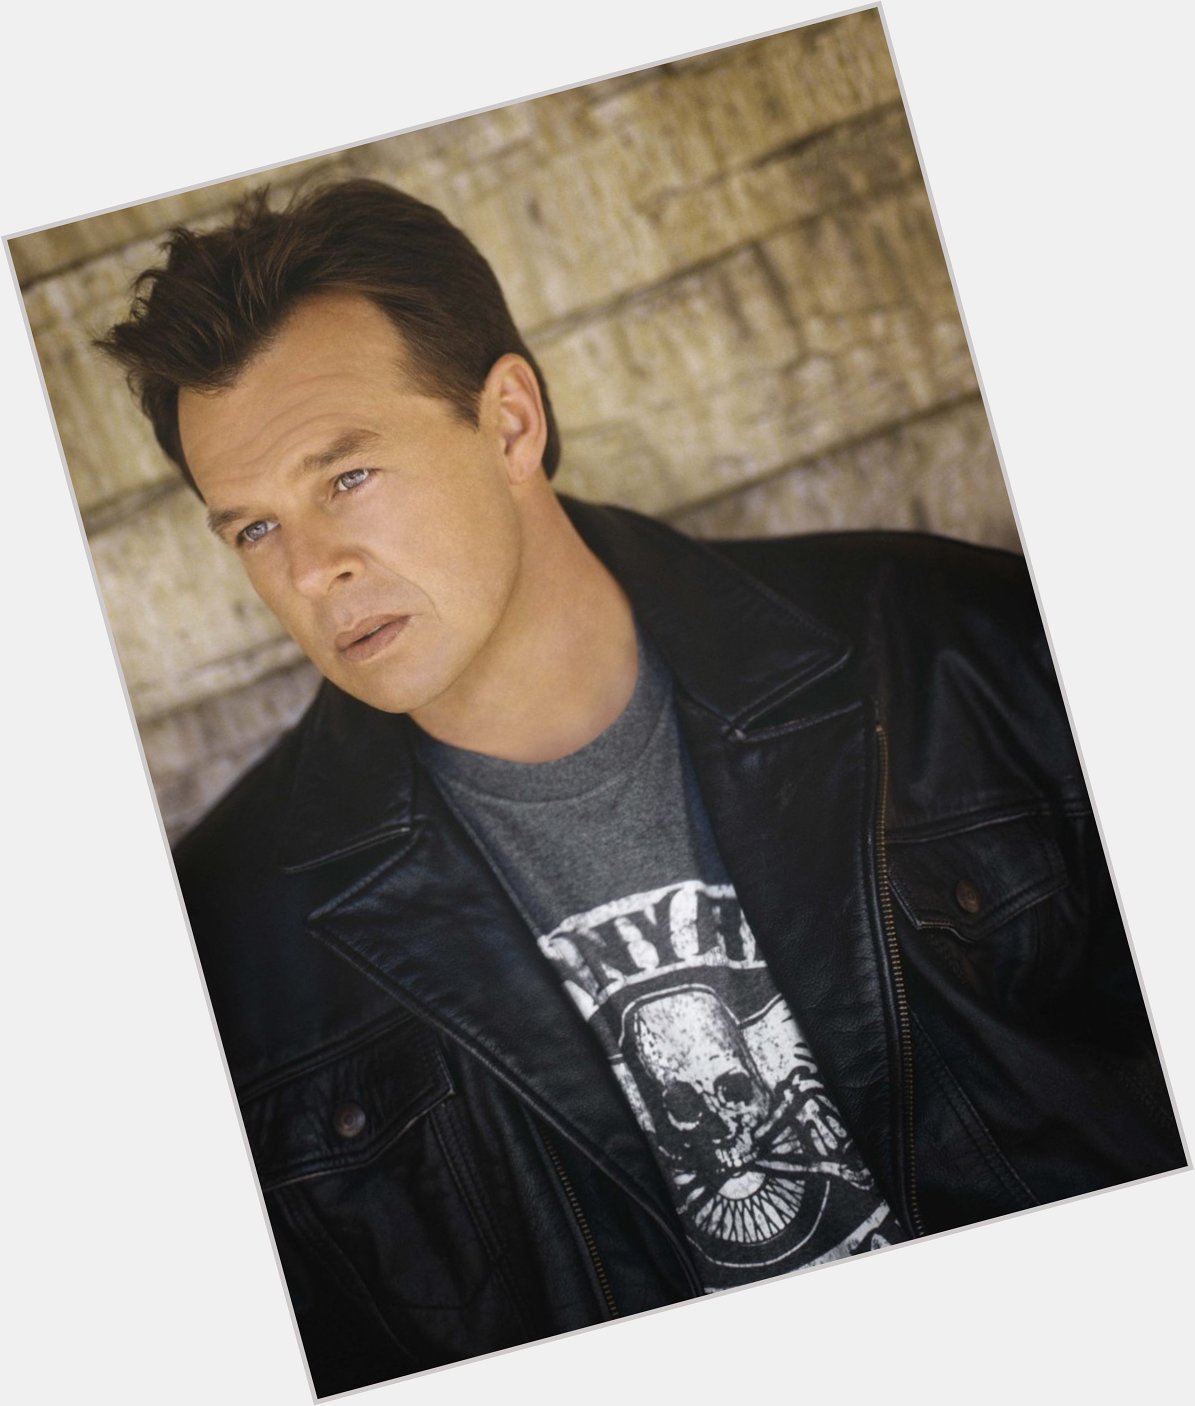 To join us in wishing a very happy birthday! What\s your favorite Sammy Kershaw song? 